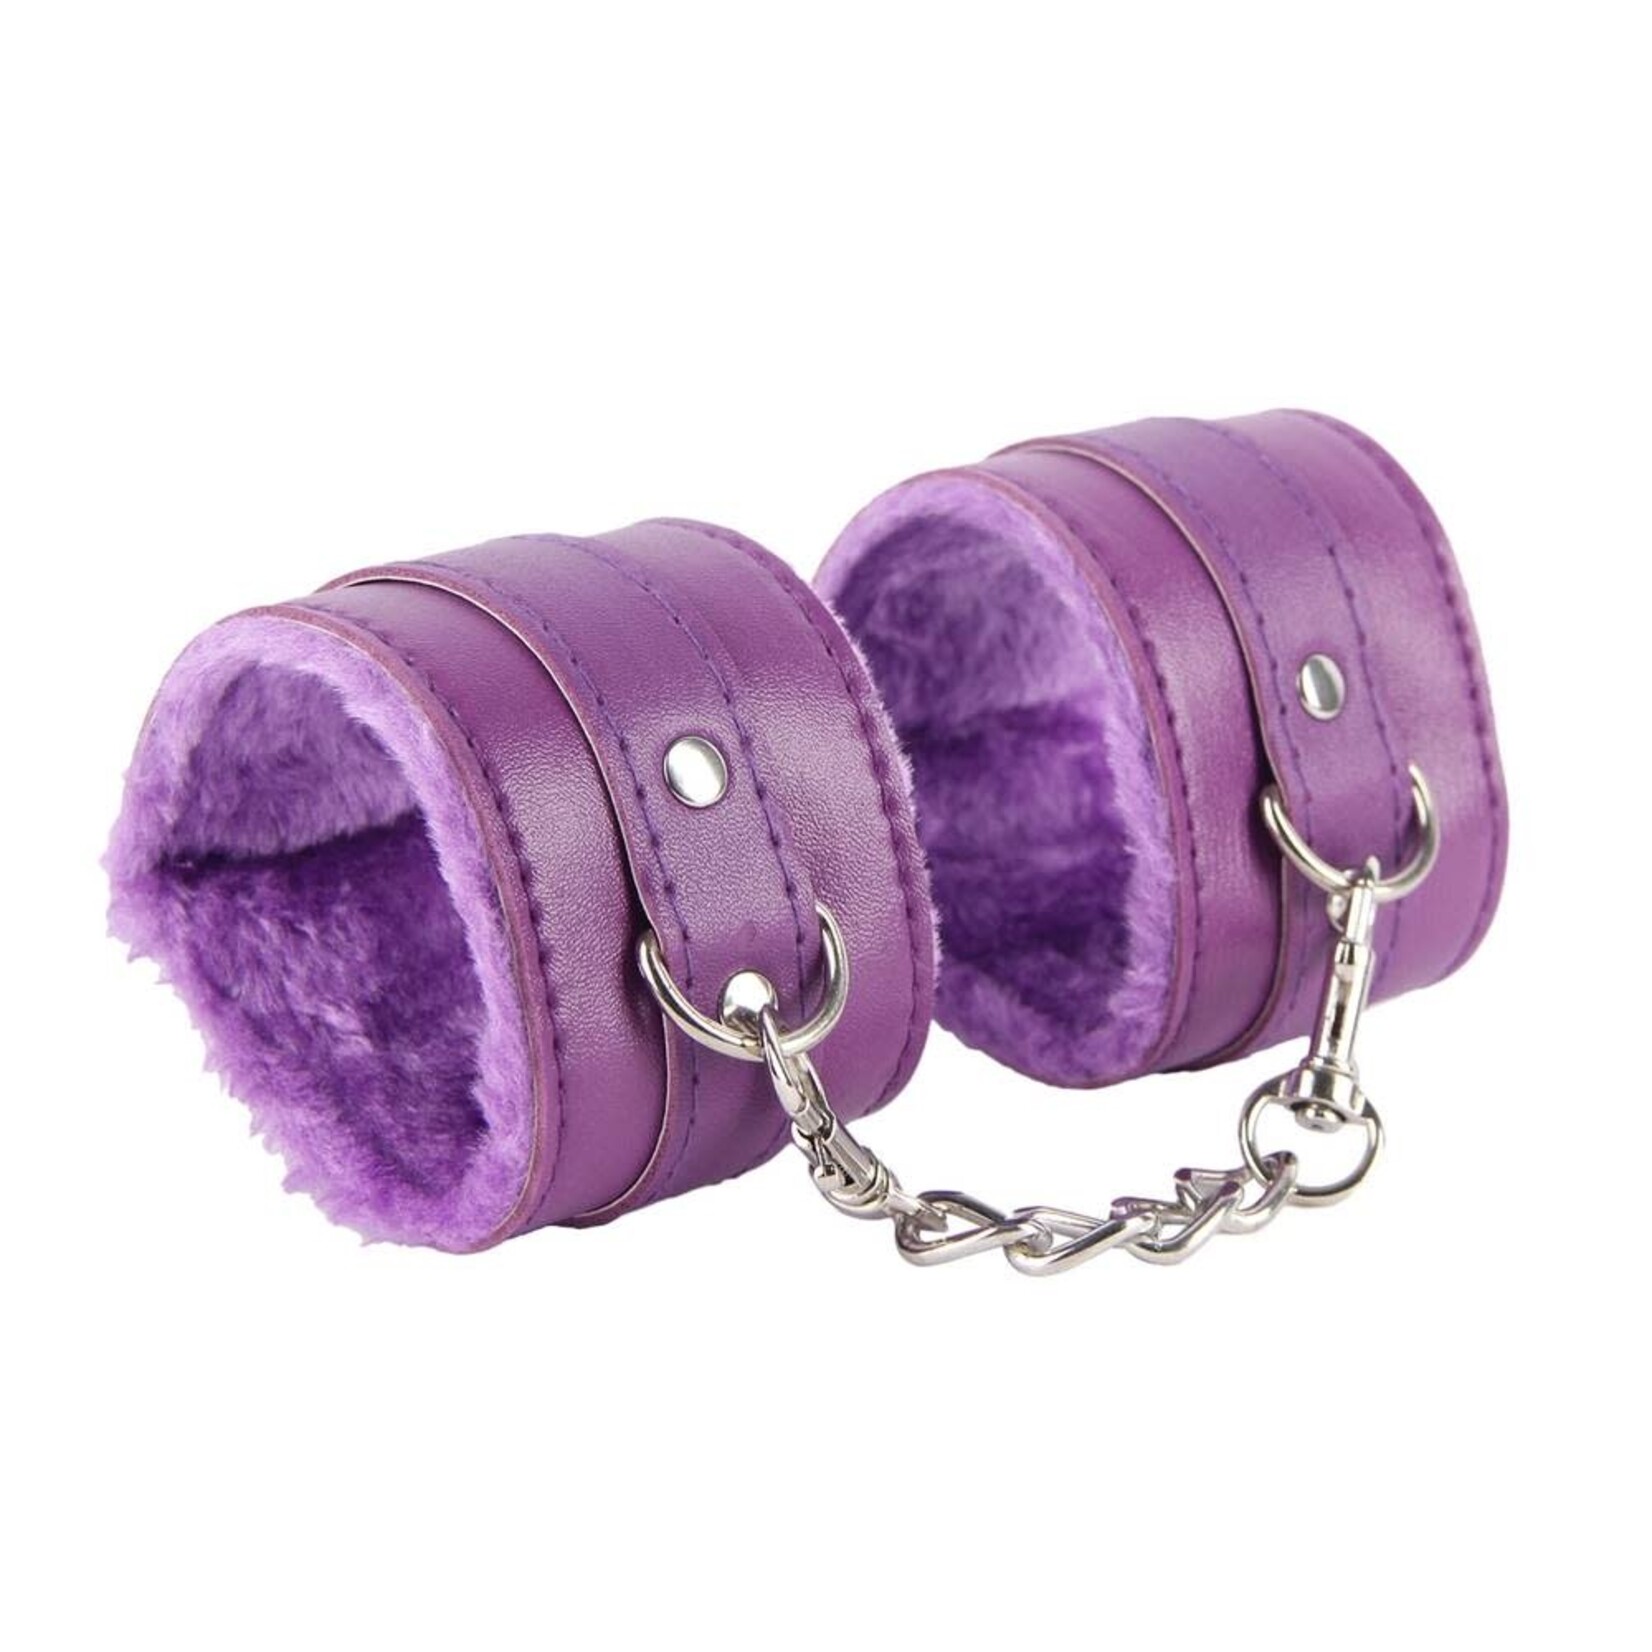 OH YEAH! -  PURPLE SM BONDAGE SEX LEATHER HANDCUFFS ONE SIZE